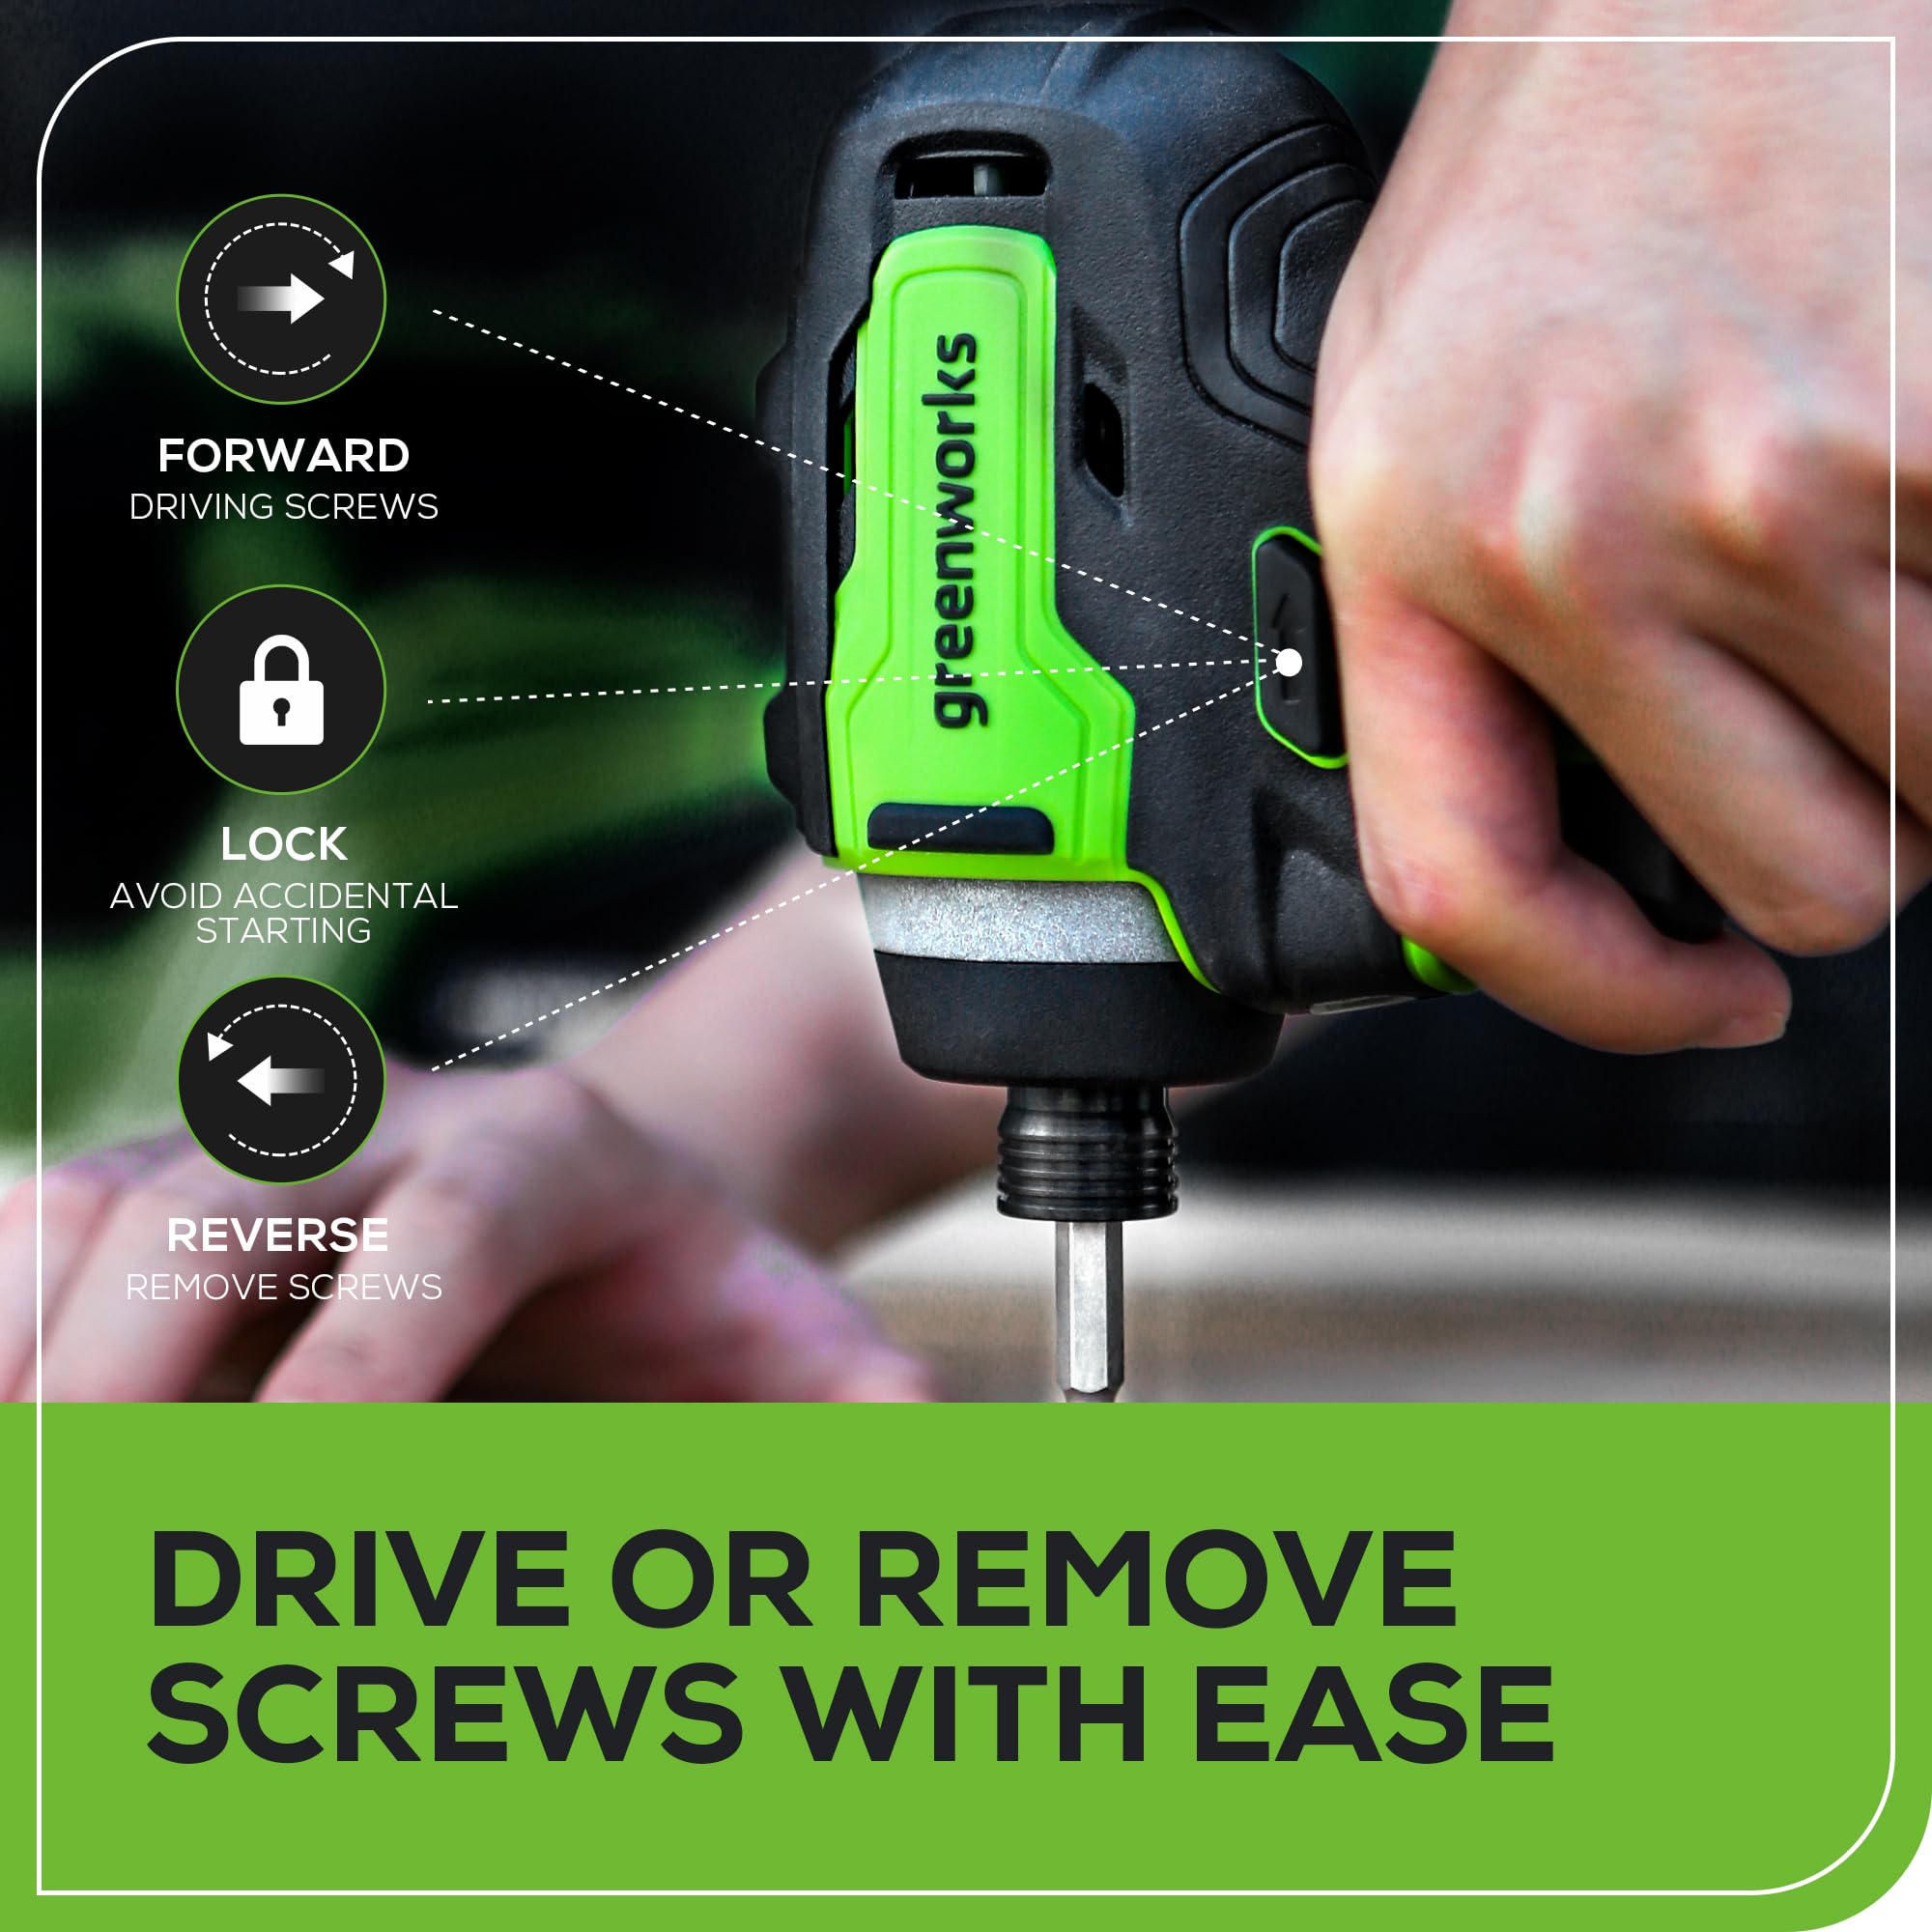 Greenworks 24V Brushless 1/4" Cordless Impact Driver, (2) 2.0Ah Batteries, Compact Charger, and Bag Included